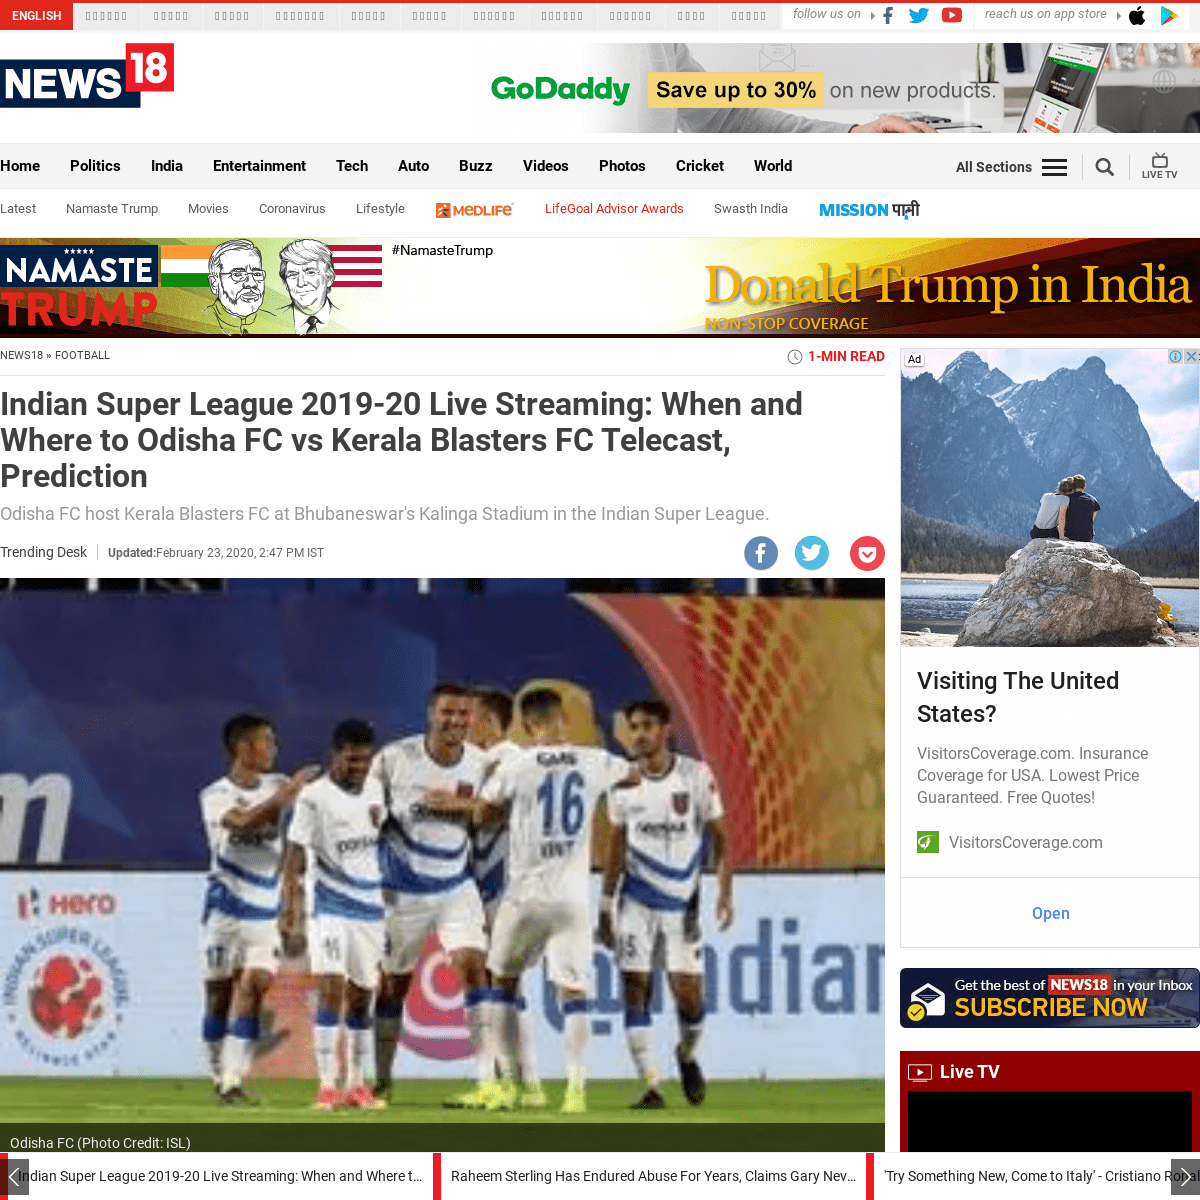 A complete backup of www.news18.com/news/football/indian-super-league-2019-20-live-streaming-when-and-where-to-odisha-fc-vs-kera